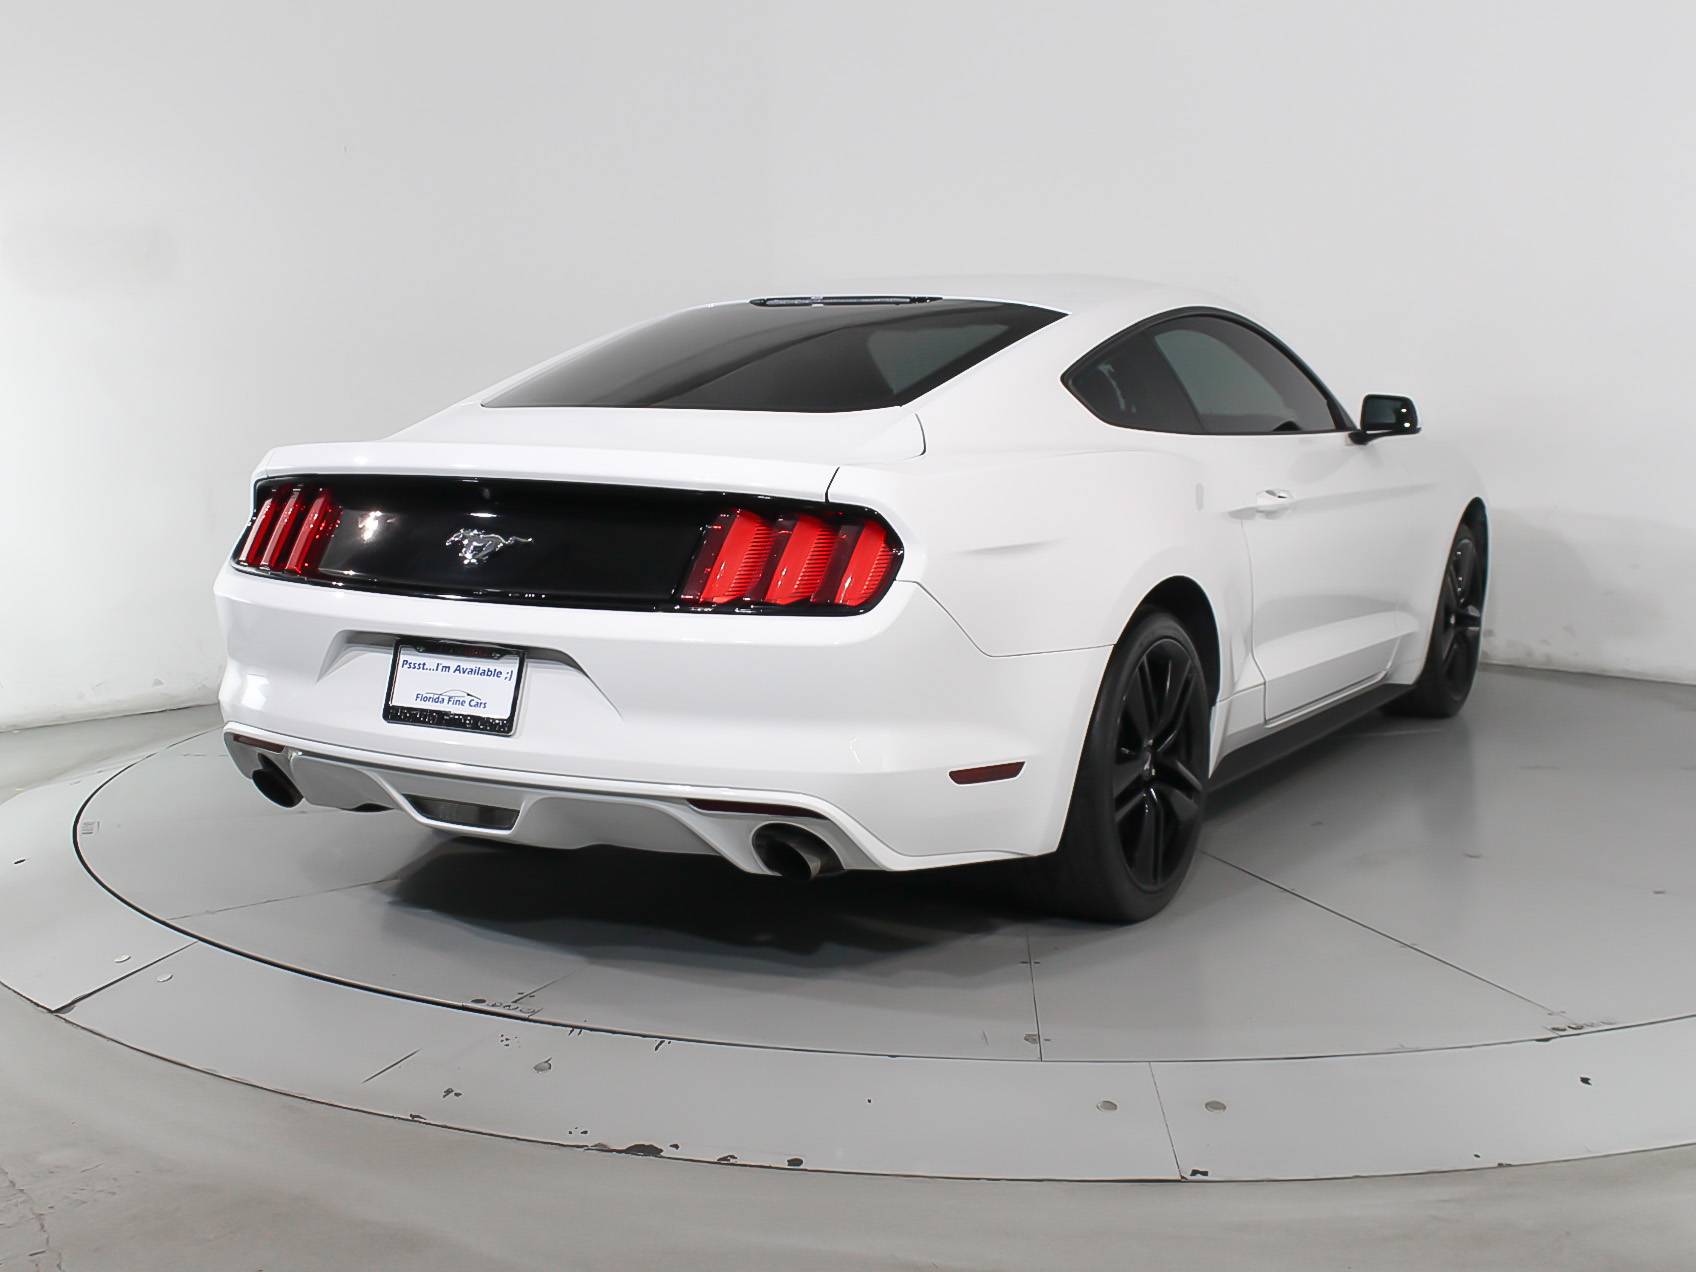 Florida Fine Cars - Used FORD MUSTANG 2016 HOLLYWOOD Ecoboost Performance